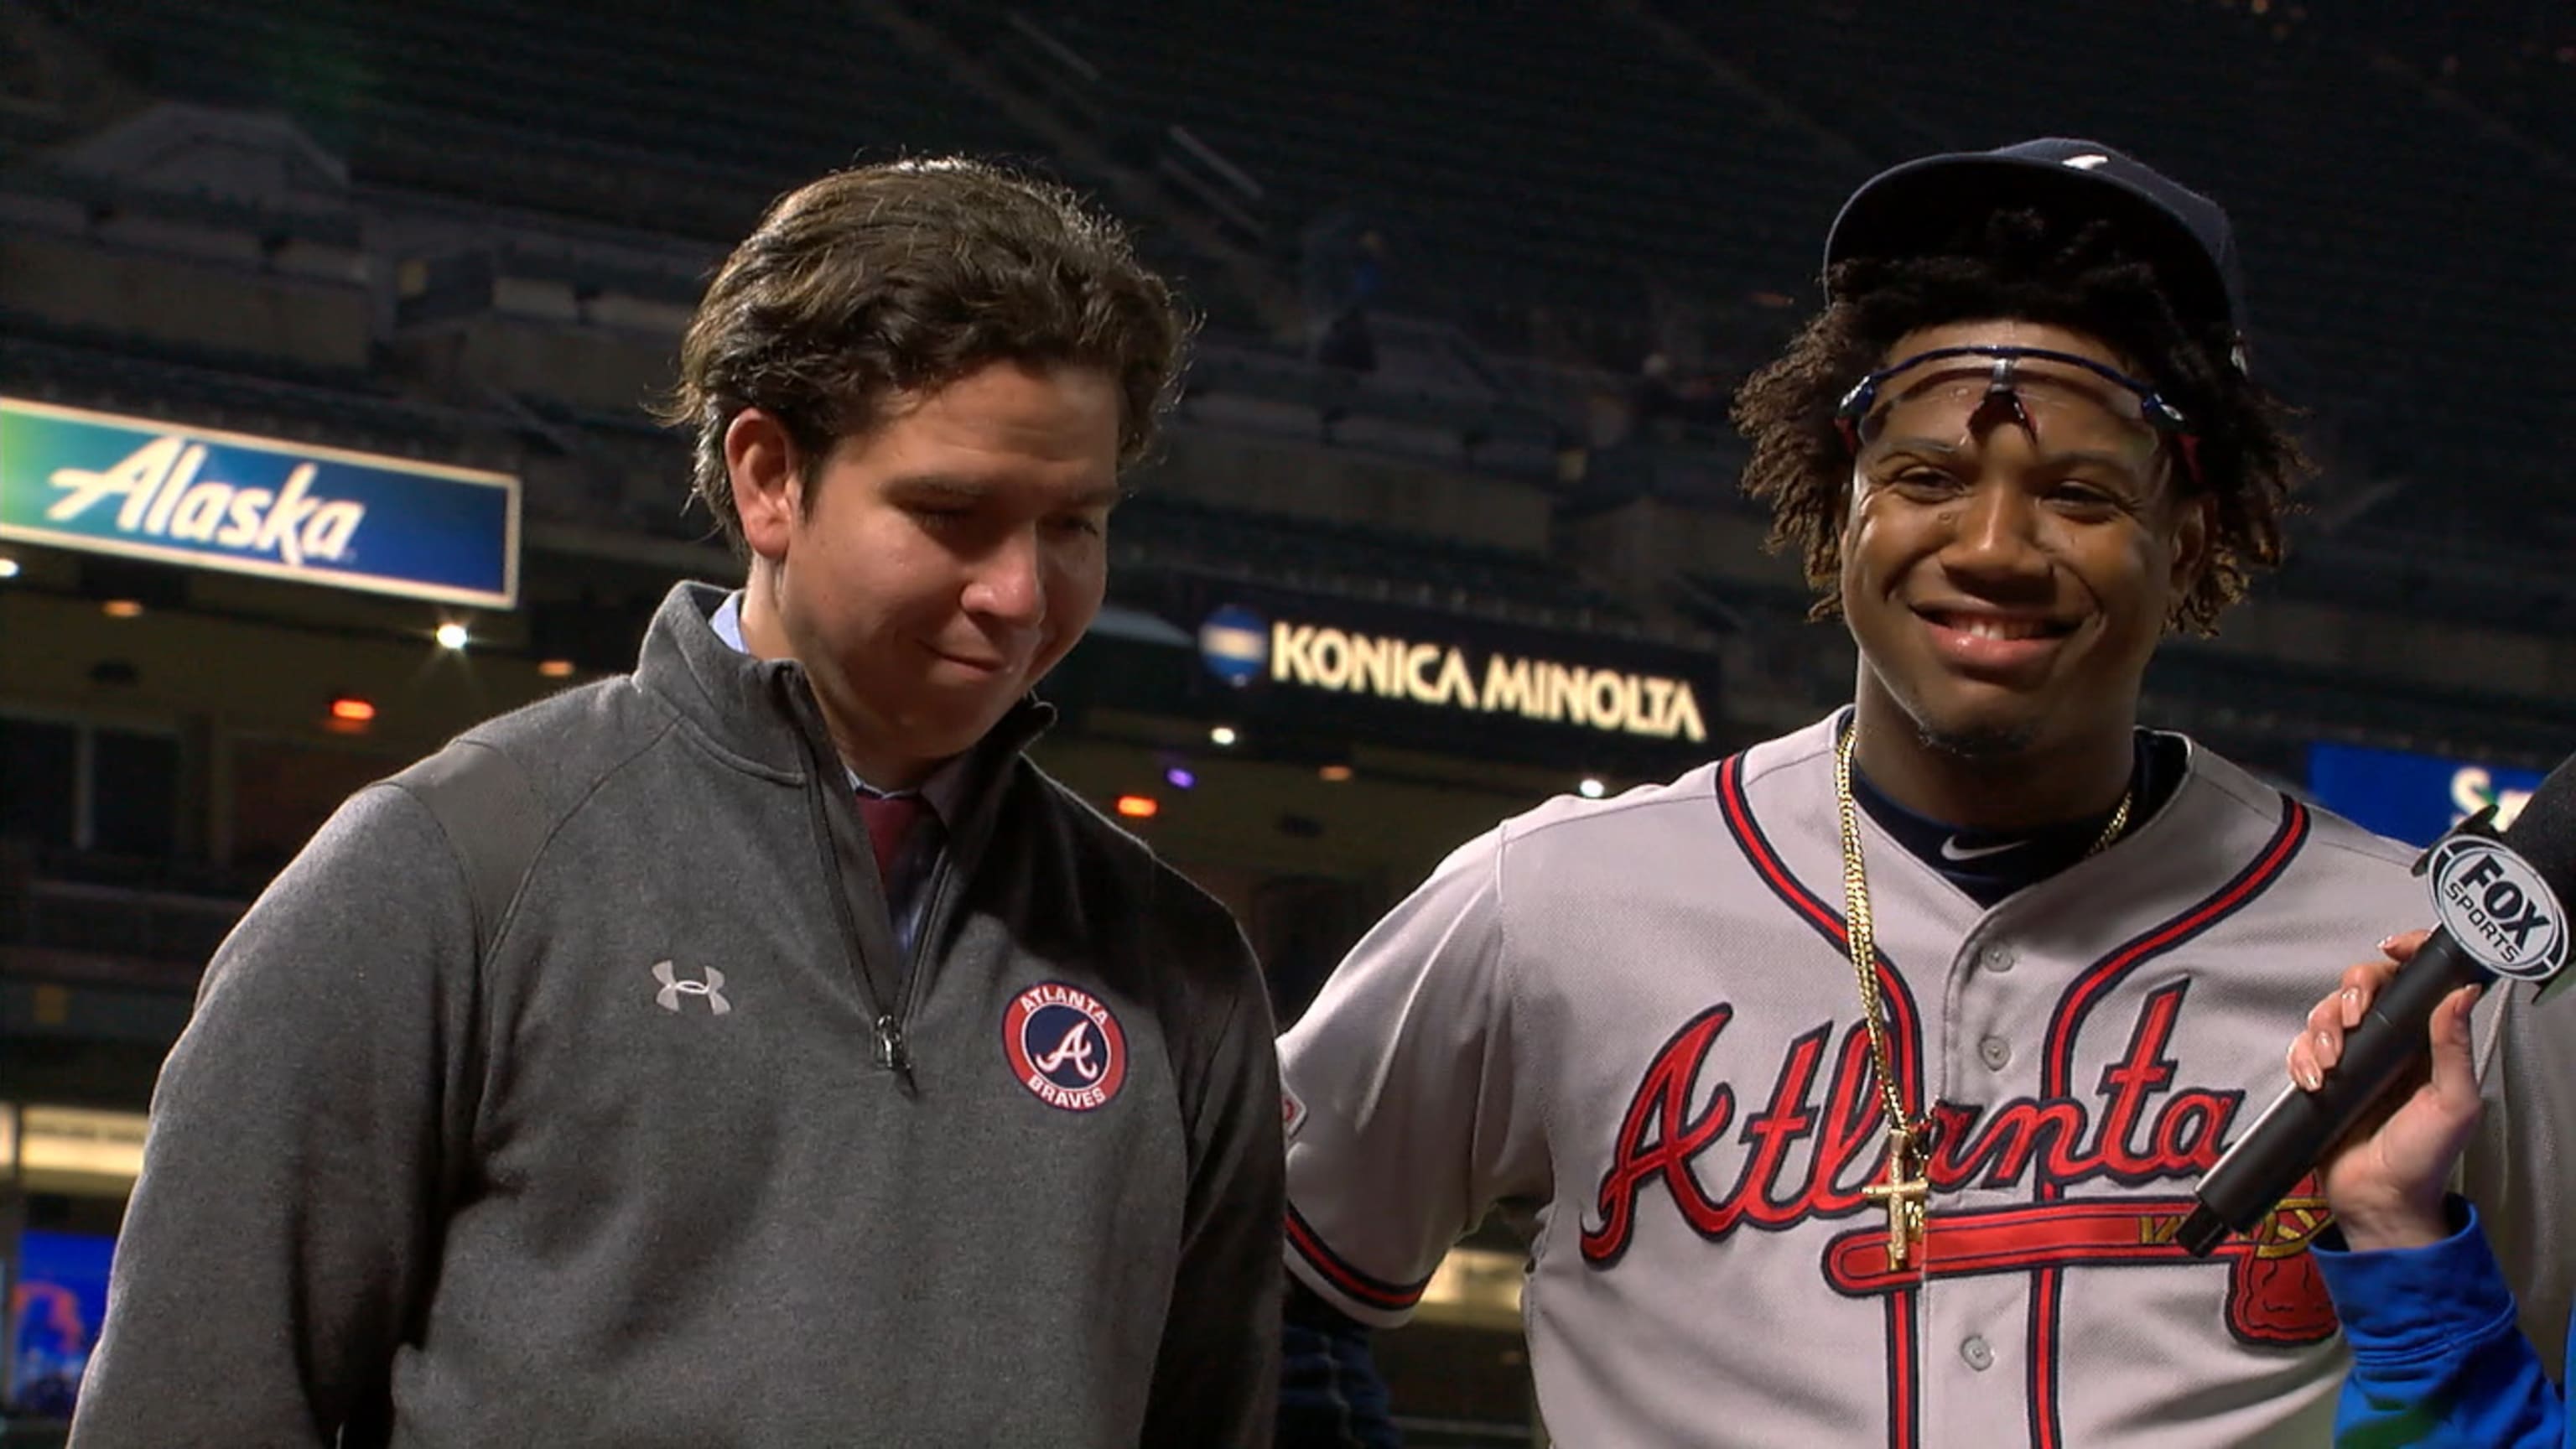 Braves star Ronald Acuña Jr. is first to hit 20 homers, steal 40 bases and  drive in 50 before break